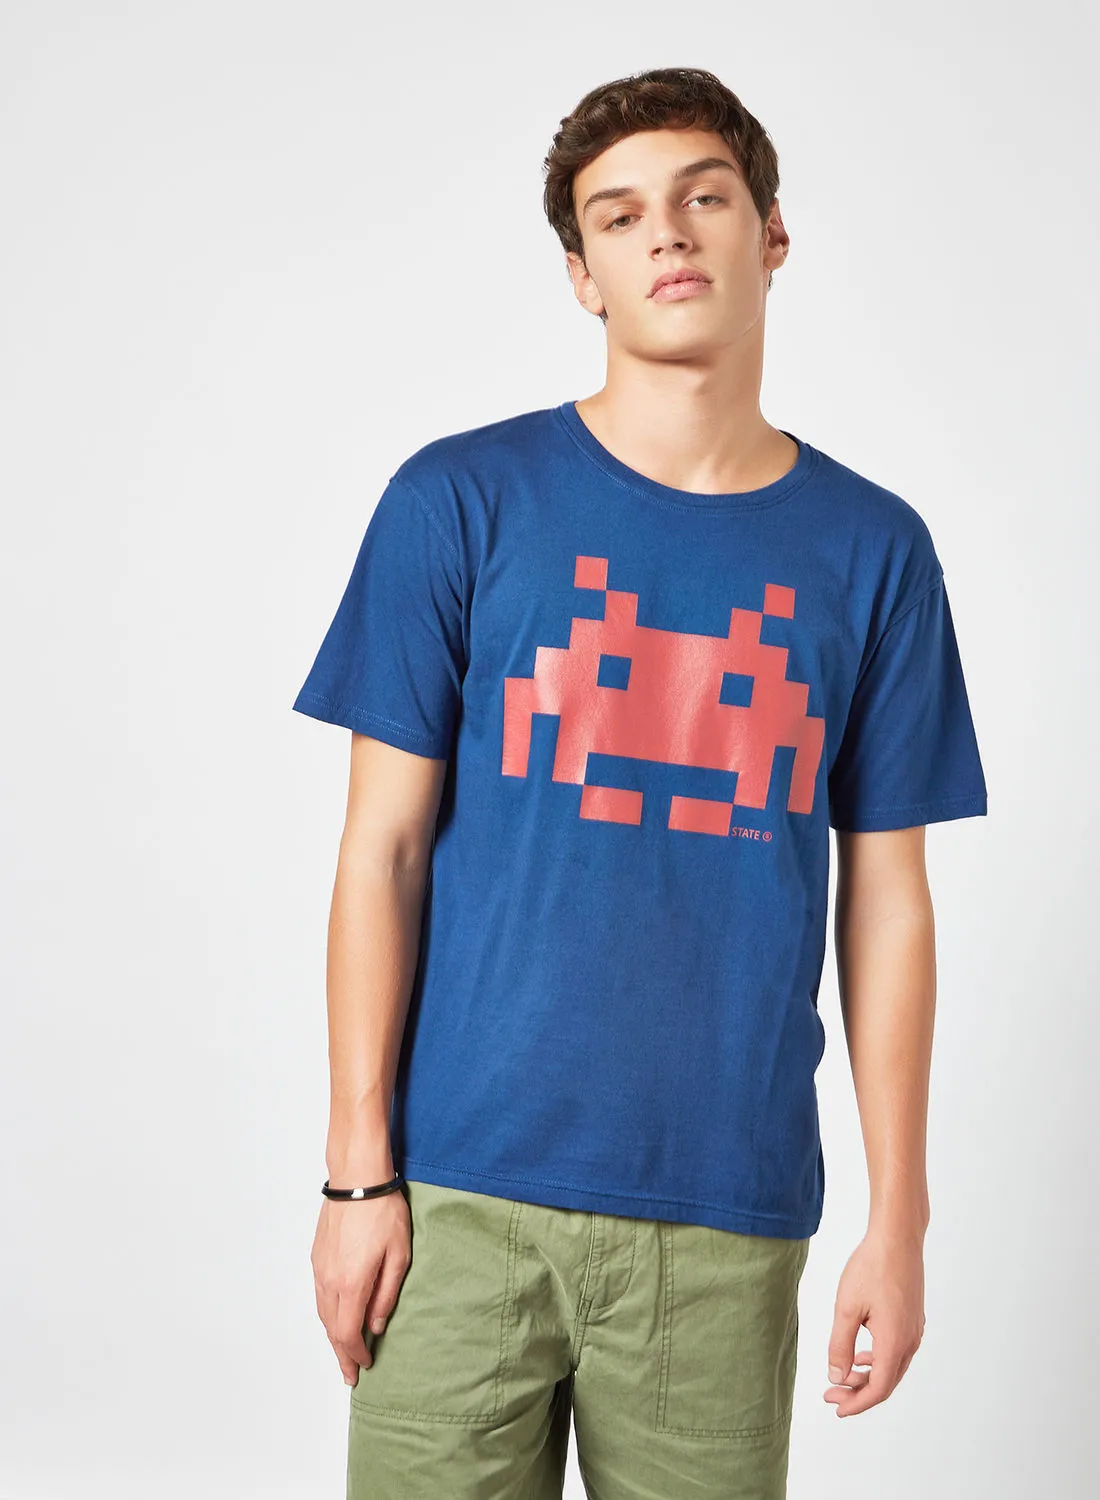 STATE 8 Graphic Print T-Shirt Blue